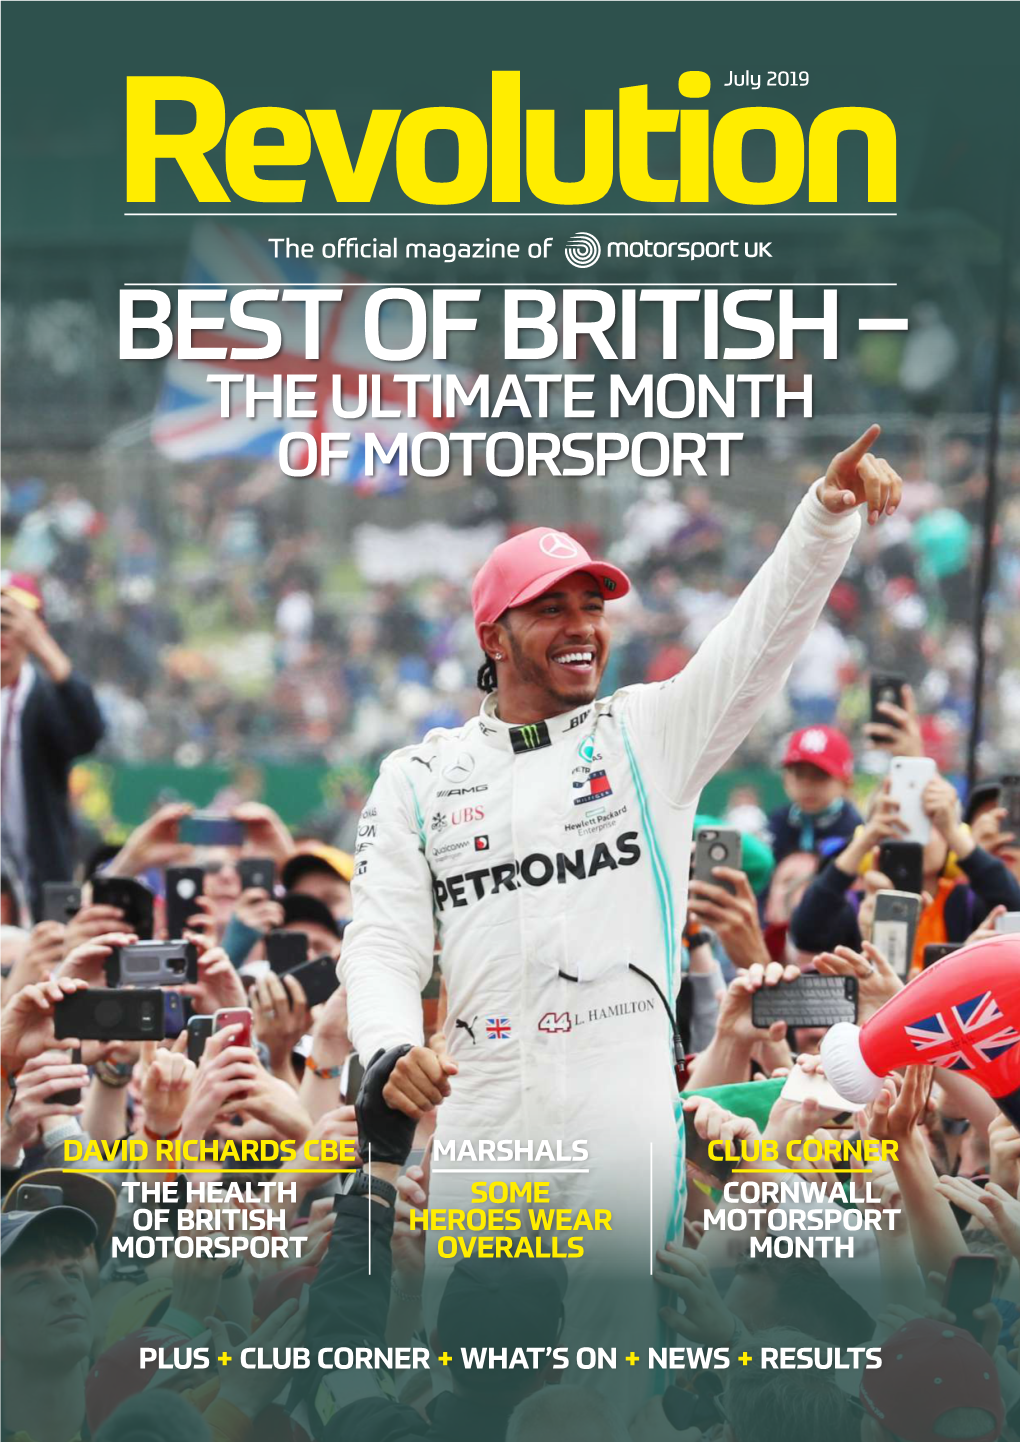 Best of British – the Ultimate Month of Motorsport